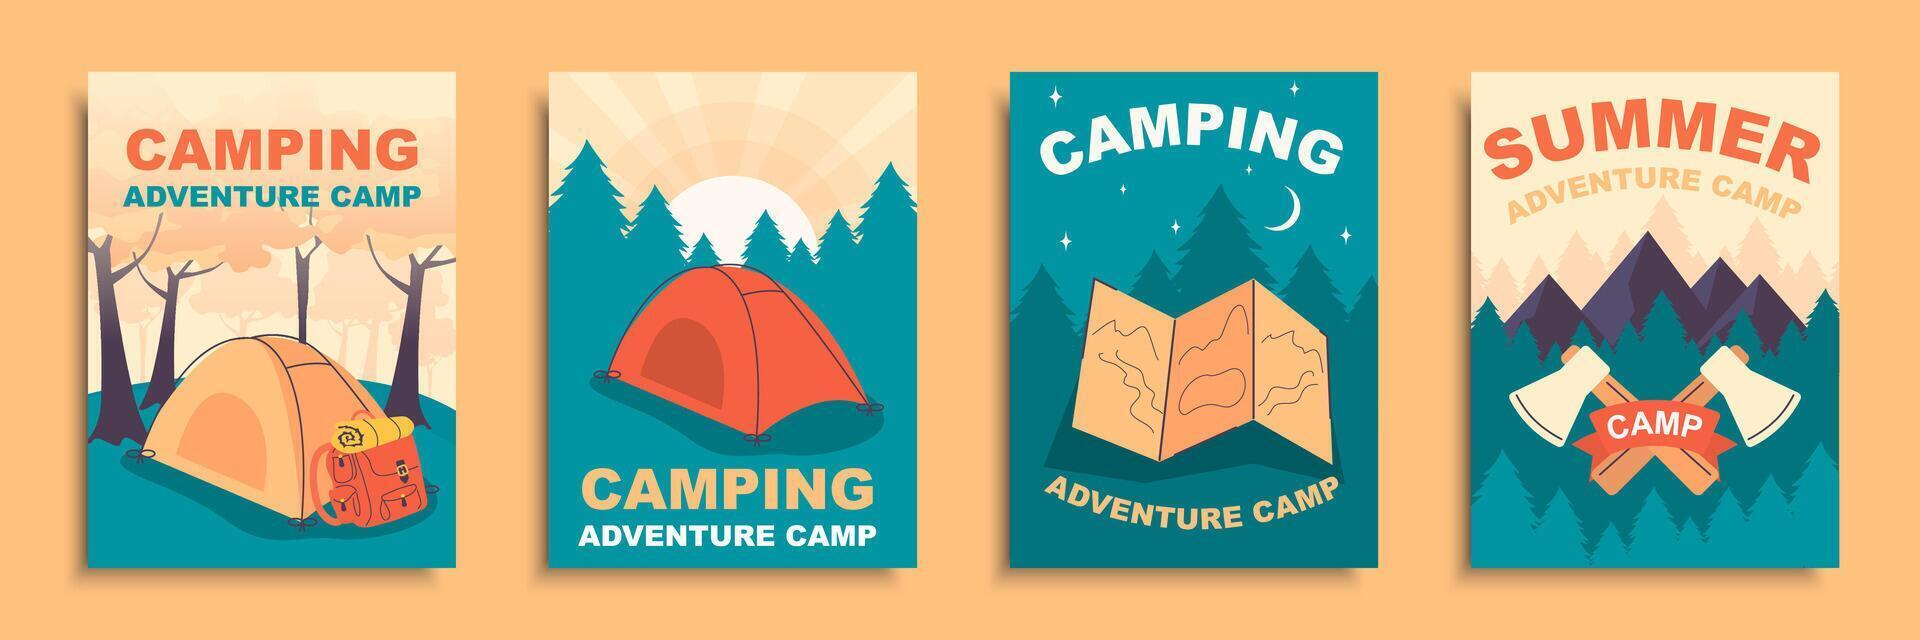 Summer camping cover brochure set in flat design. Poster templates with campsite tent and touristic backpack in forest, hiking route on map, adventure weekend in outdoor trip. Vector illustration.